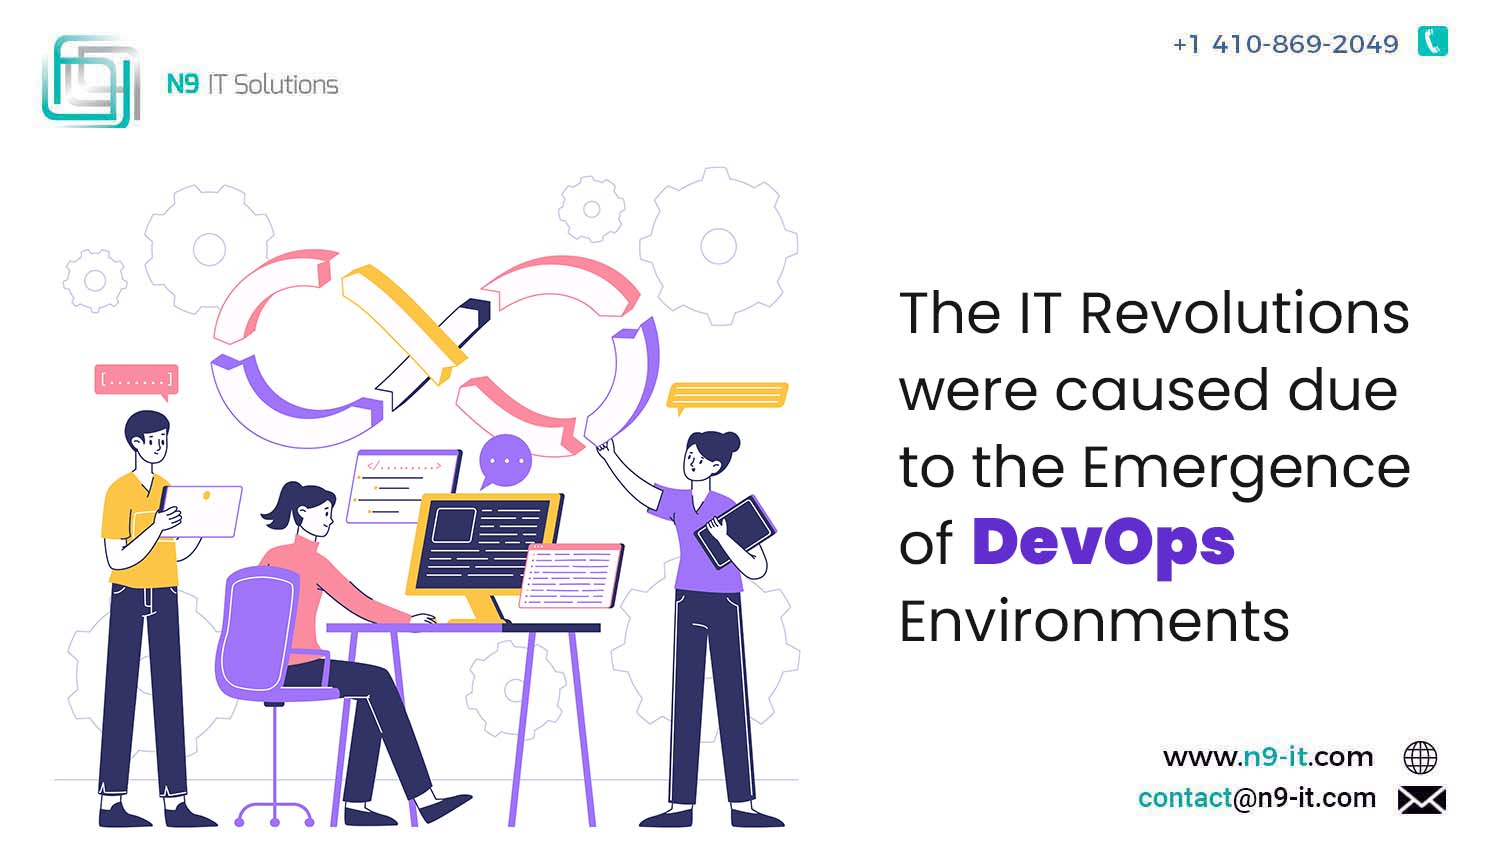 The IT Revolutions were caused due to the Emergence of DevOps Environments